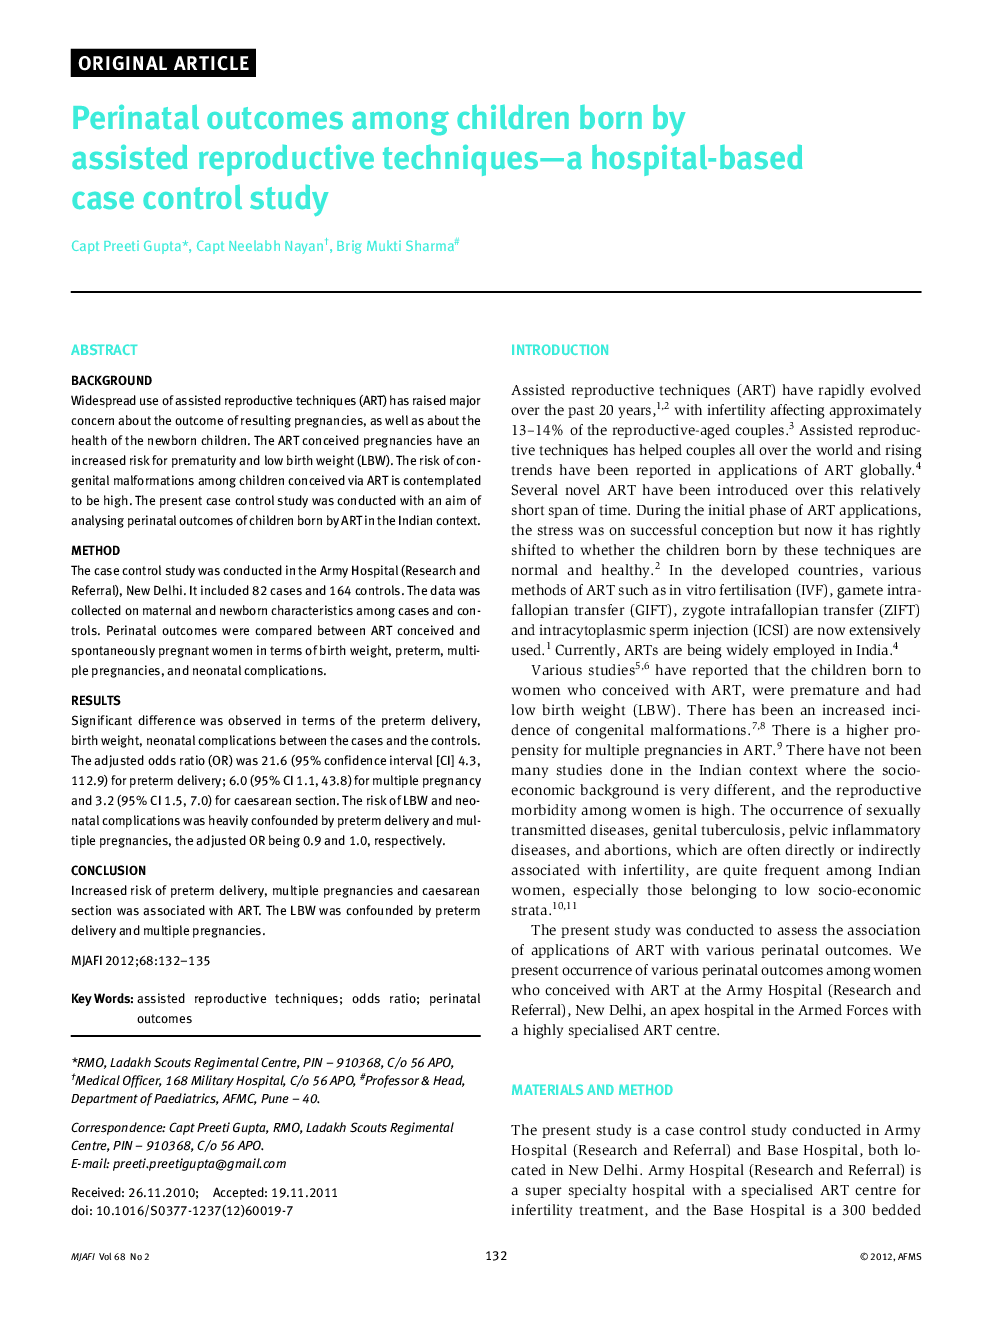 Perinatal outcomes among children born by assisted reproductive techniques—a hospital-based case control study